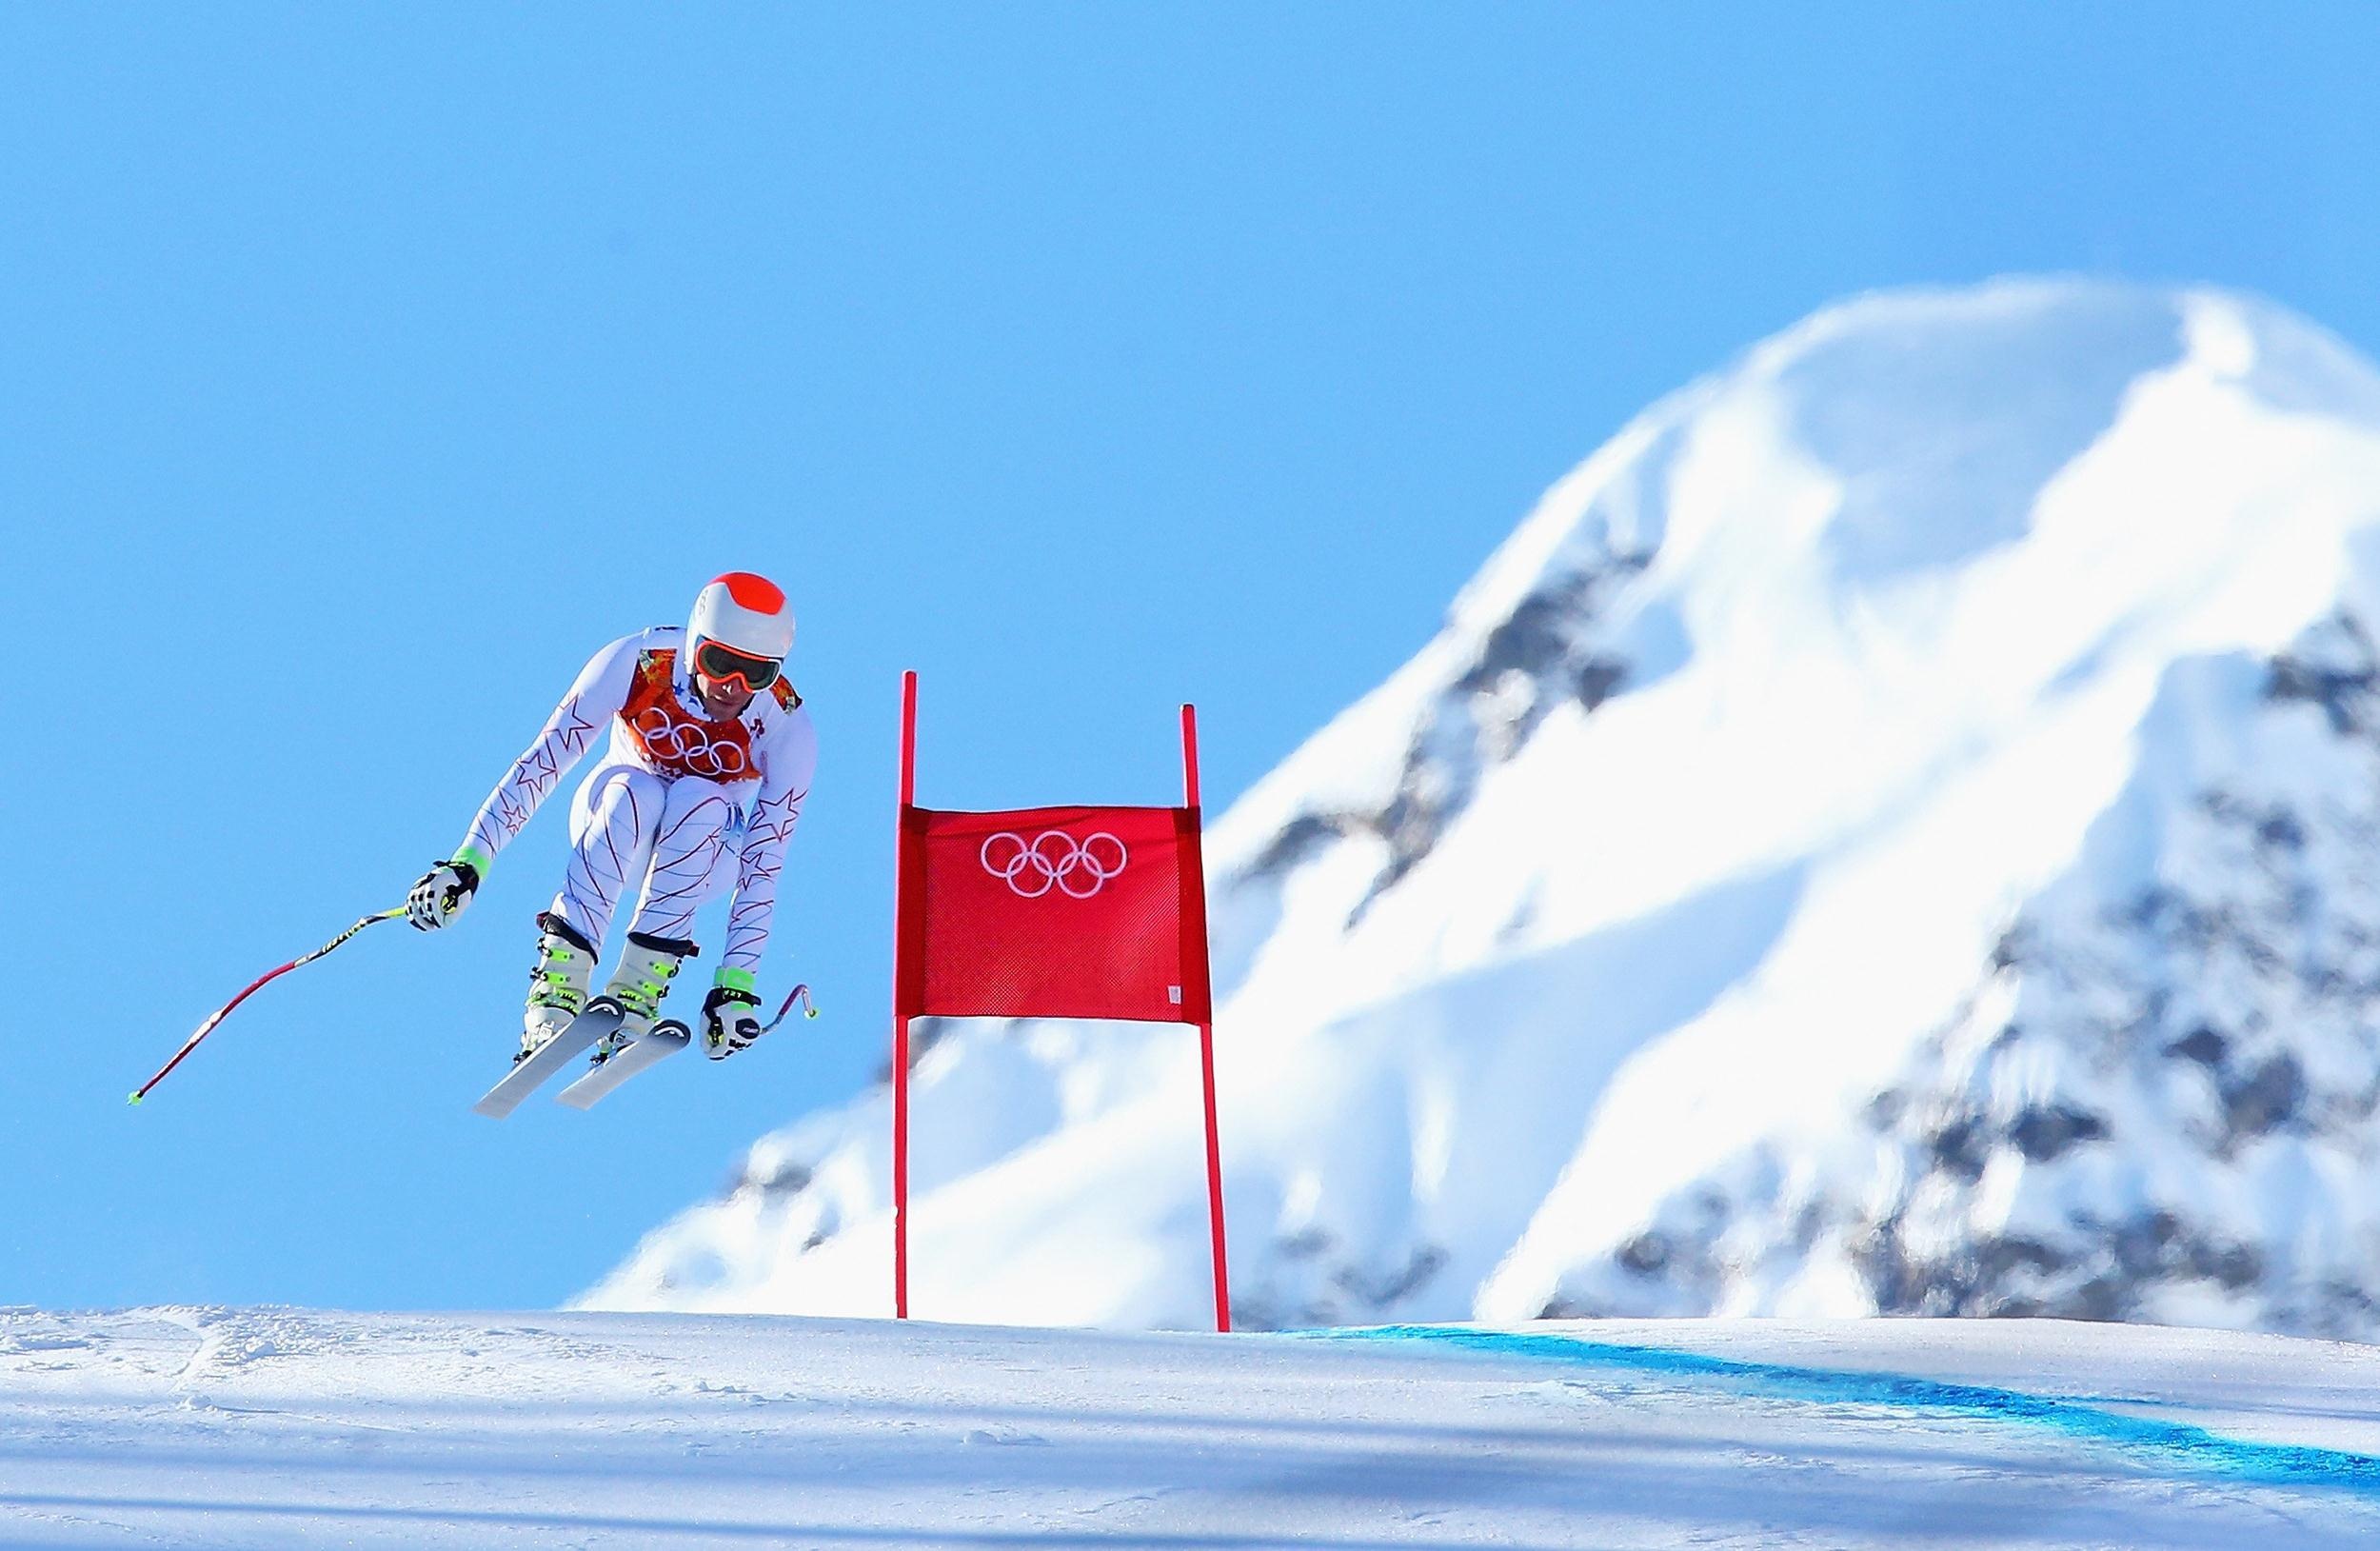 Alpine Skiing: Downhill in a zigzag between upright obstacles, Bode Miller, Sochi 2014 Olympic Winter Games. 2500x1630 HD Background.